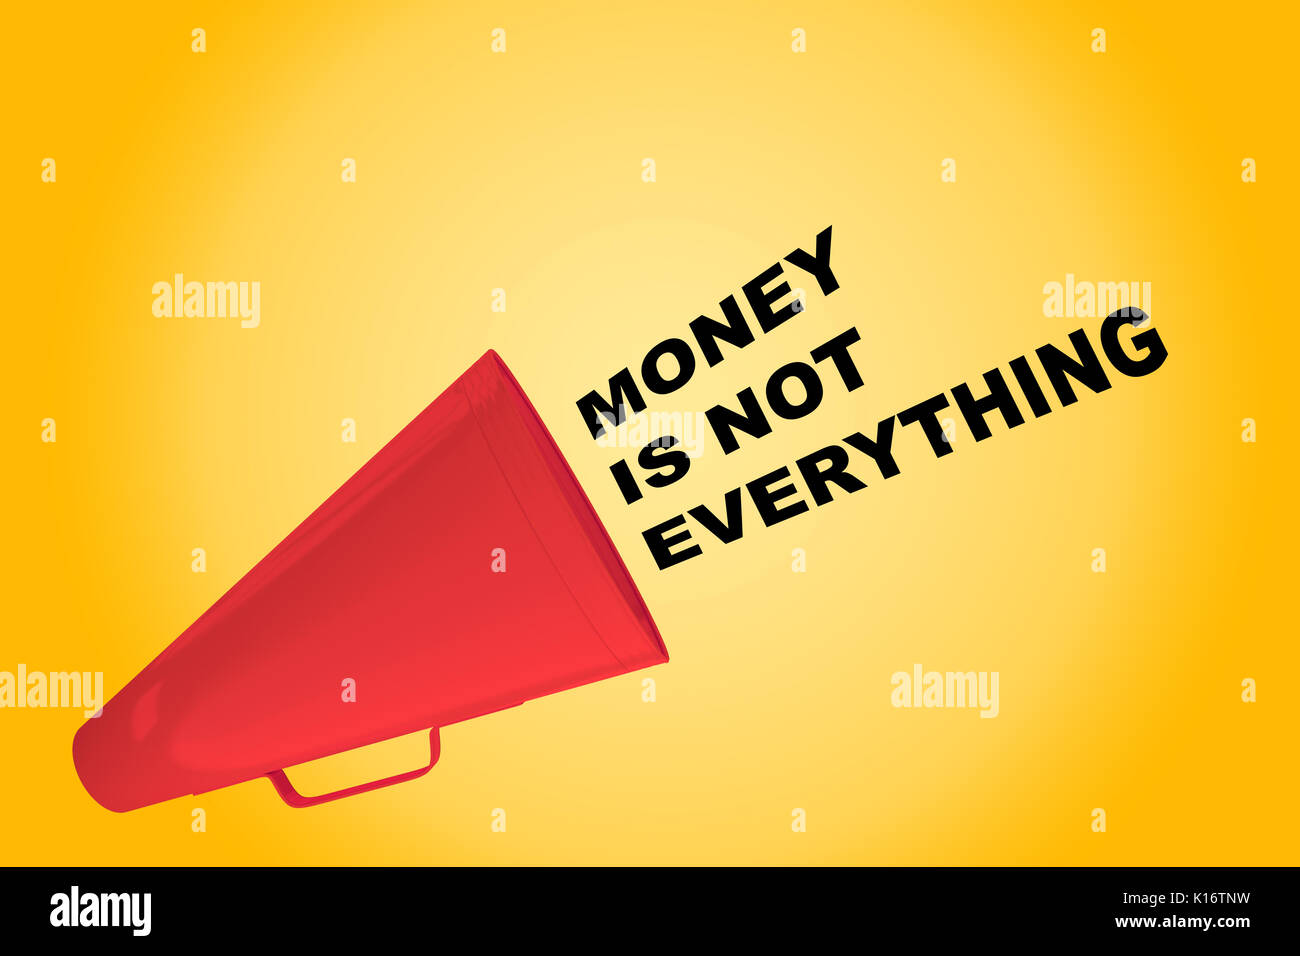 Money Is Everything Stock Photos Money Is Everything Stock Images - 3d illustration of money is not everything title flowing from a loudspeaker stock